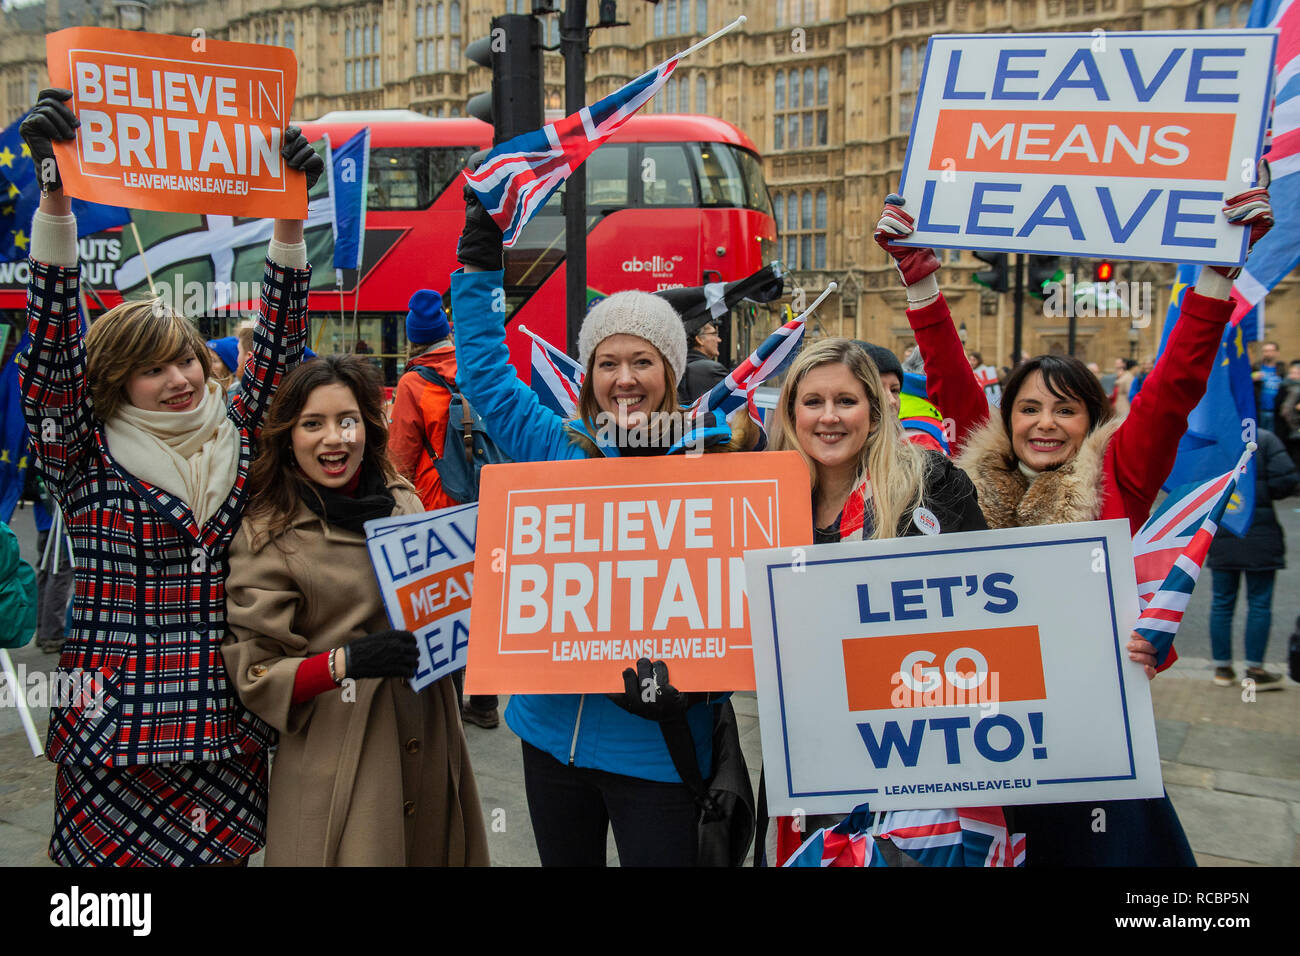 London, UK. 15th January, 2019. Leave means leave and SODEM, pro EU, protestors continue to make their points, side by side, outside Parliament as the vote on Theresa May's plan is due the next day. Credit: Guy Bell/Alamy Live News Stock Photo